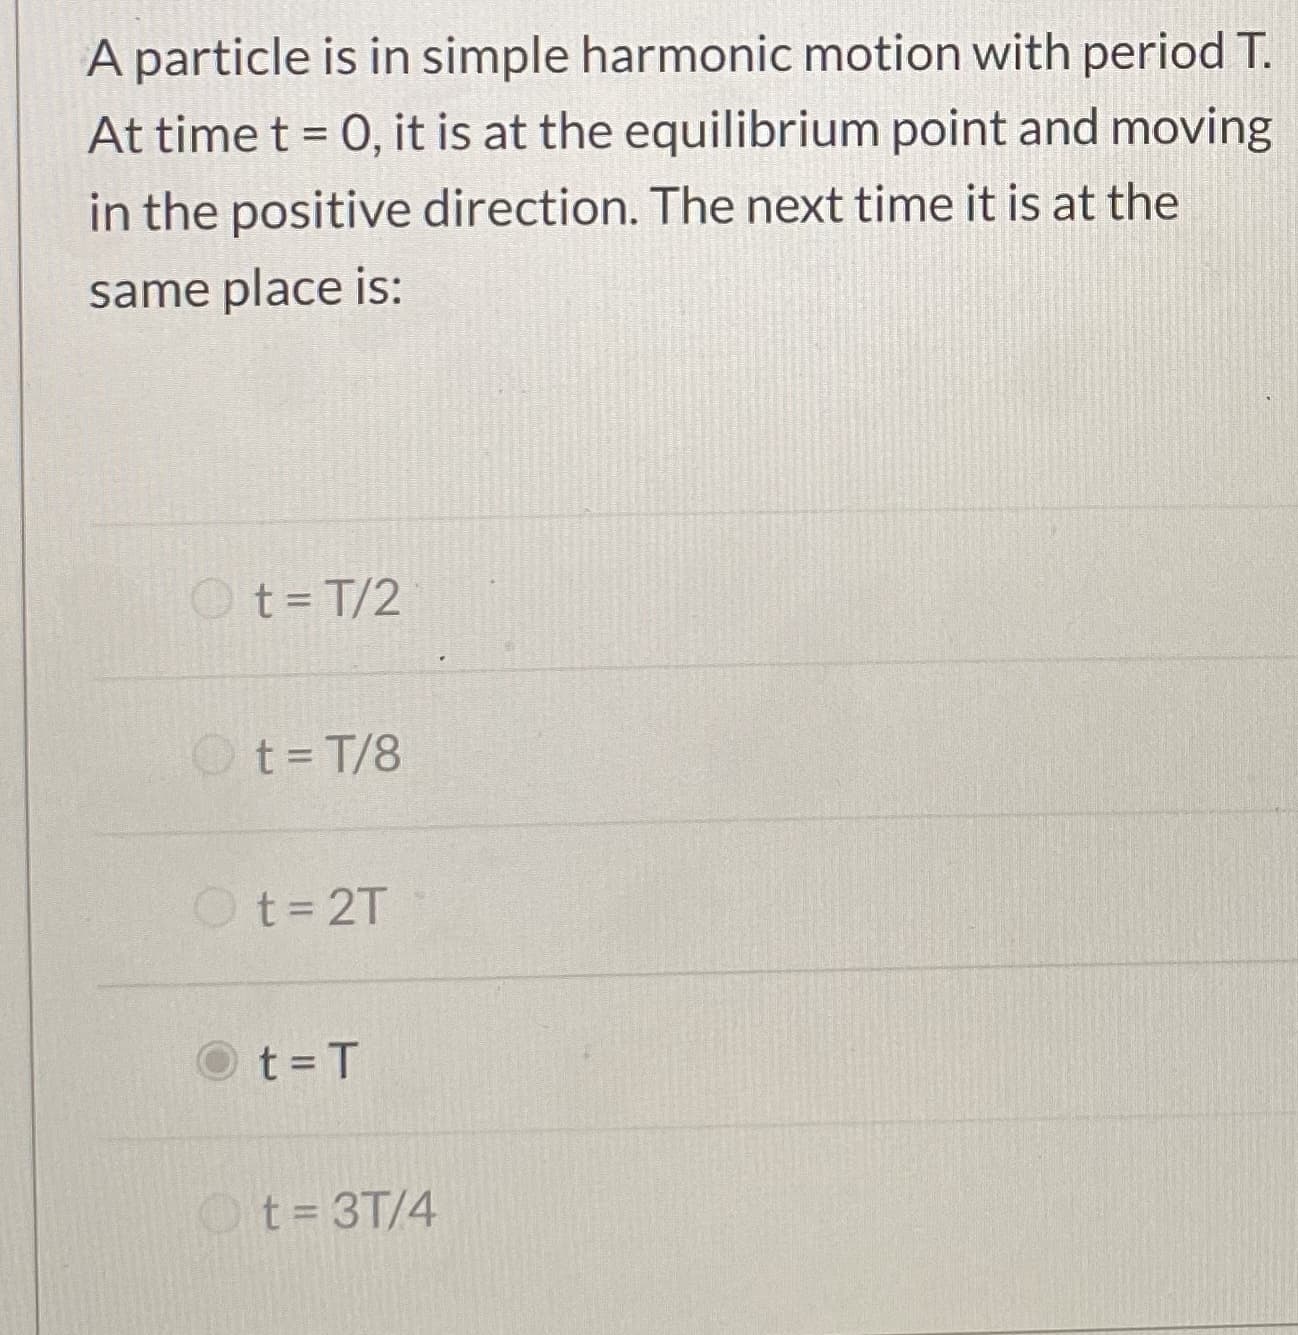 A particle is in simple harmonic motion with period T.
At time t = 0, it is at the equilibrium point and moving
%3D
in the positive direction. The next time it is at the
same place is:
Ot=T/2
Ot=T/8
Ot=2T
t = T
Ot= 3T/4
